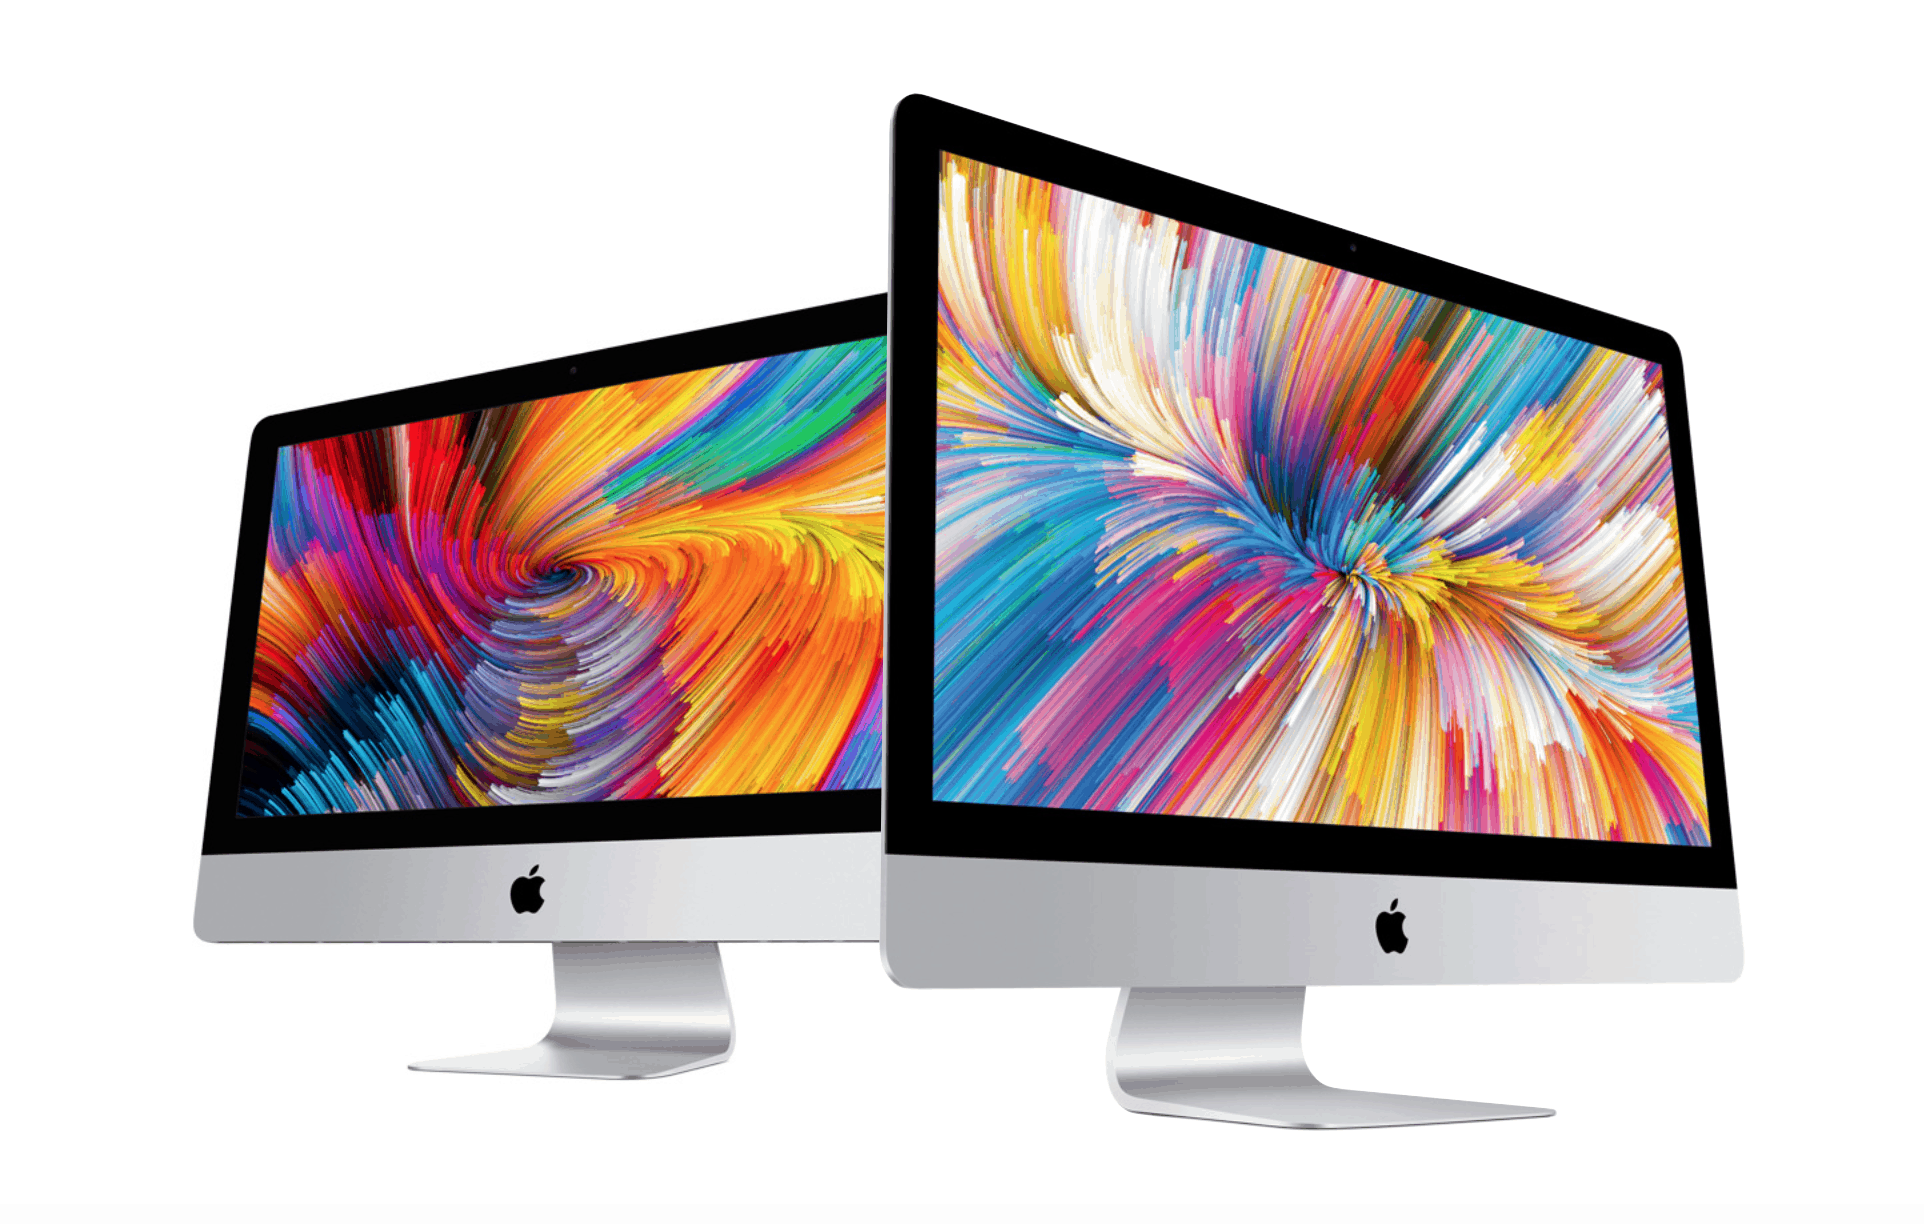 Apple iMac 2018 (Latest Model) 21.5-inch 4K and 1080p Display are up for Sale on Amazon